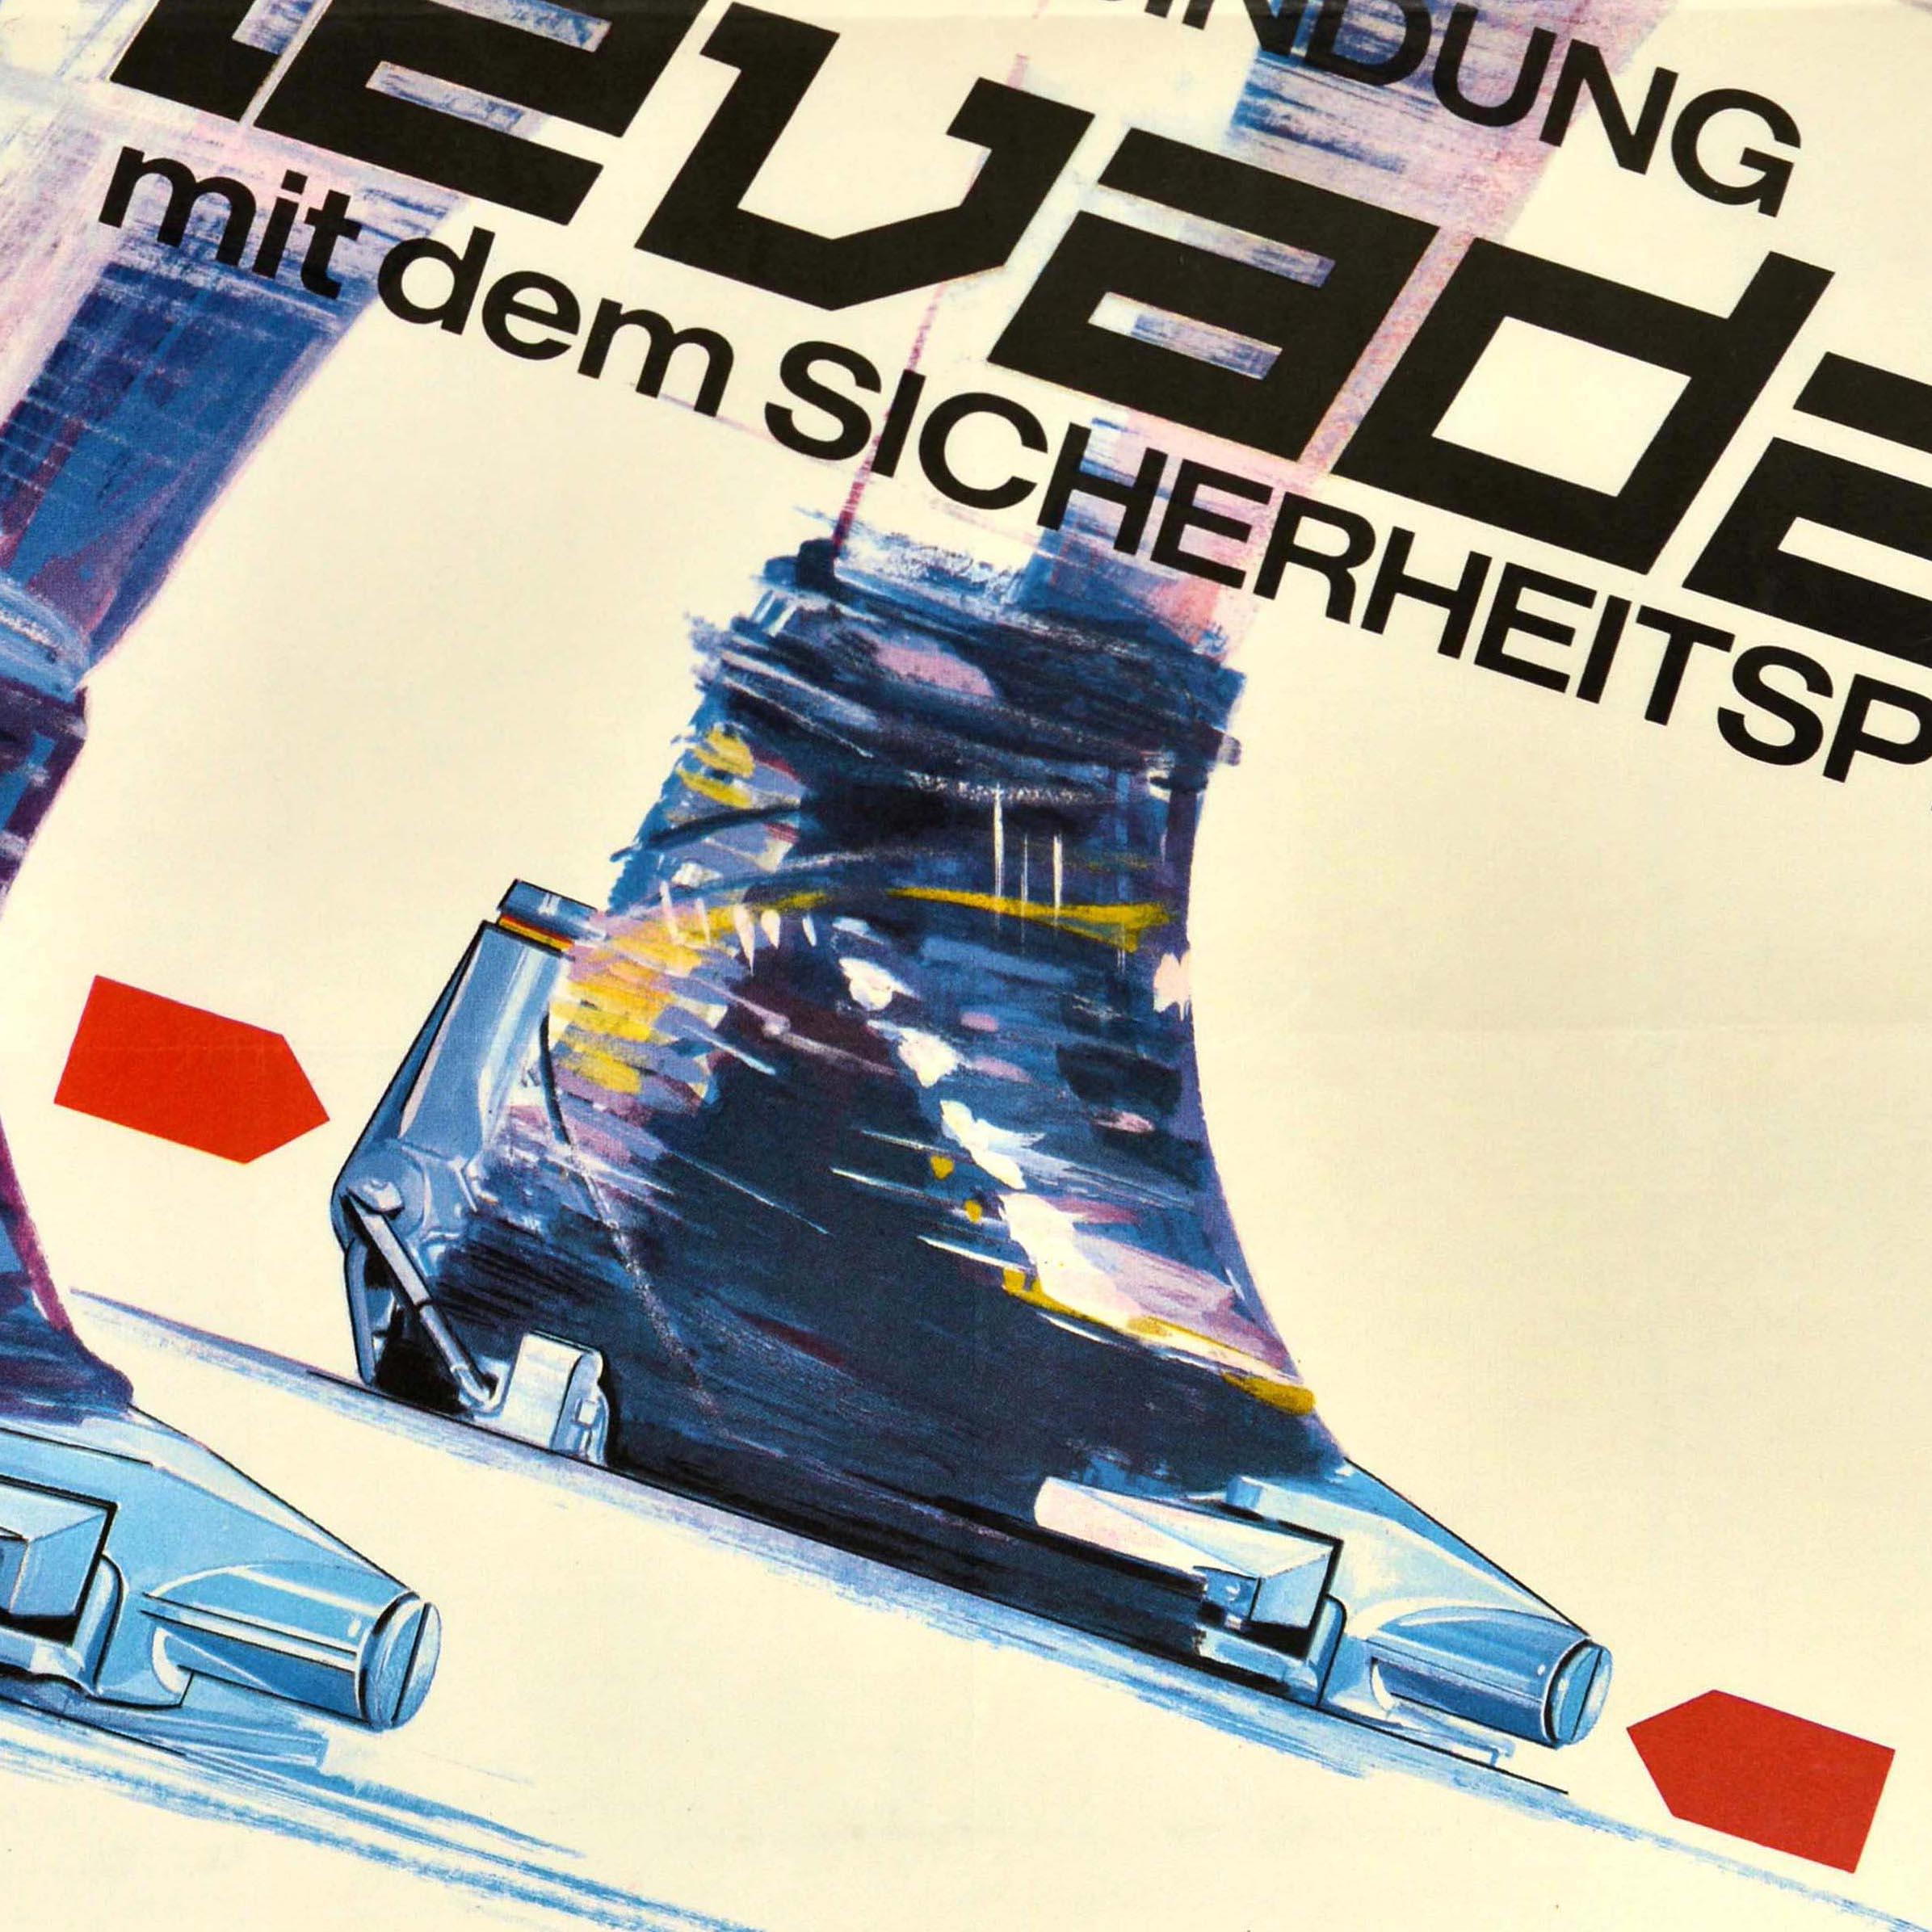 Original vintage poster for Nevada ski equipment - The safety binding Nevada with the safety plus / Die Sicherheitsbindung Nevada mit dem Sicherheitsplus - featuring a dynamic image of a skier wearing a helmet and goggles skiing at speed downhill